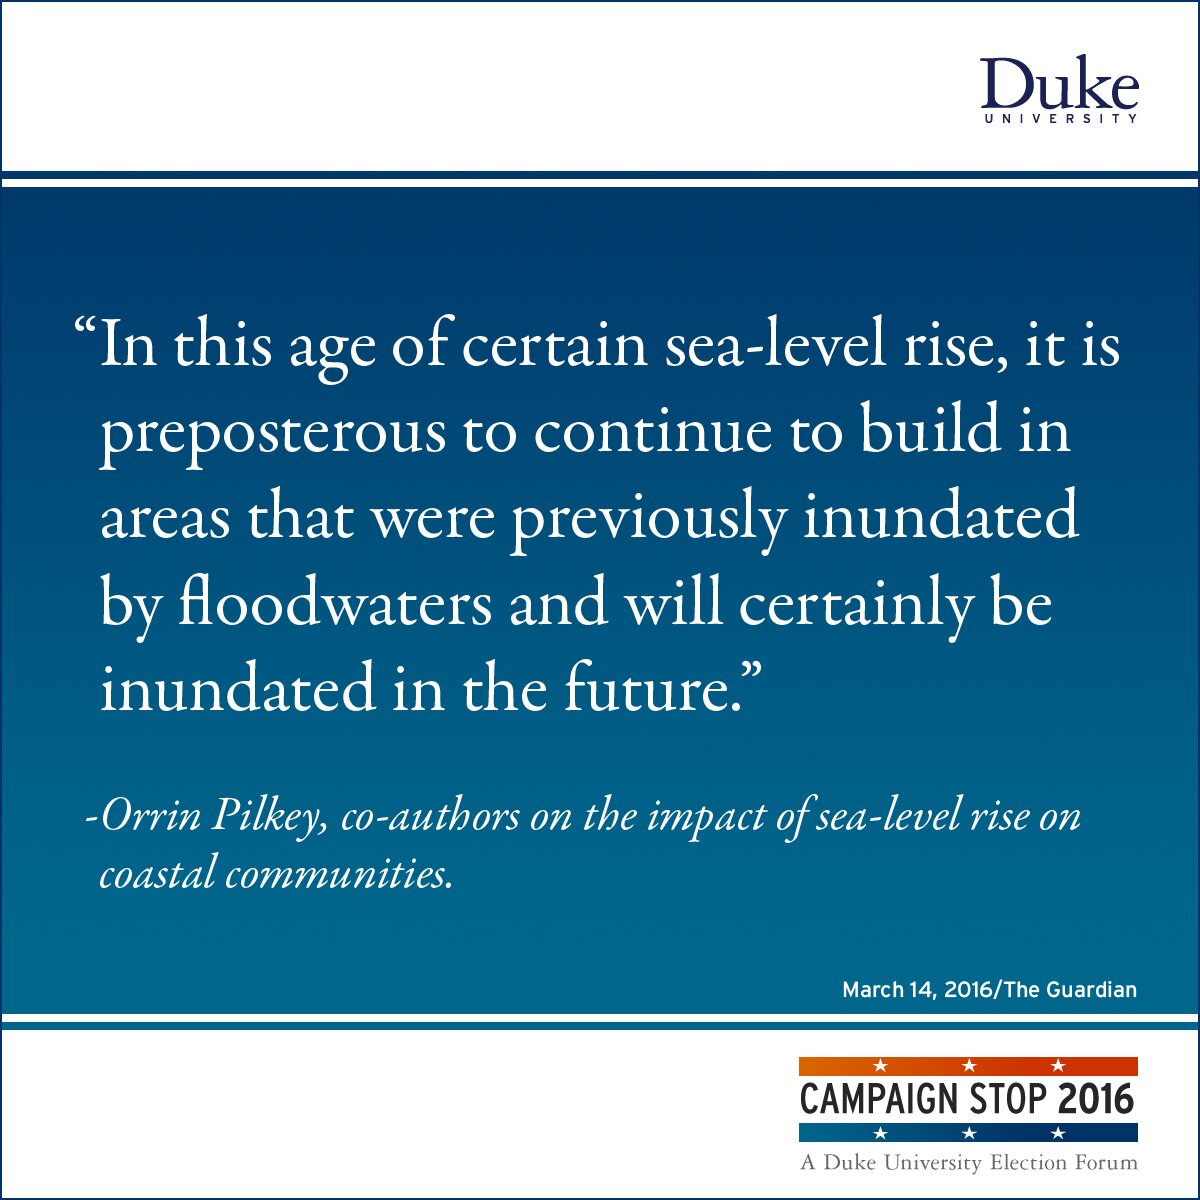 “In this age of certain sea-level rise, it is preposterous to continue to build in areas that were previously inundated by floodwaters and will certainly be inundated in the future.” -Orrin Pilkey, co-authors on the impact of sea-level rise on coastal communities.